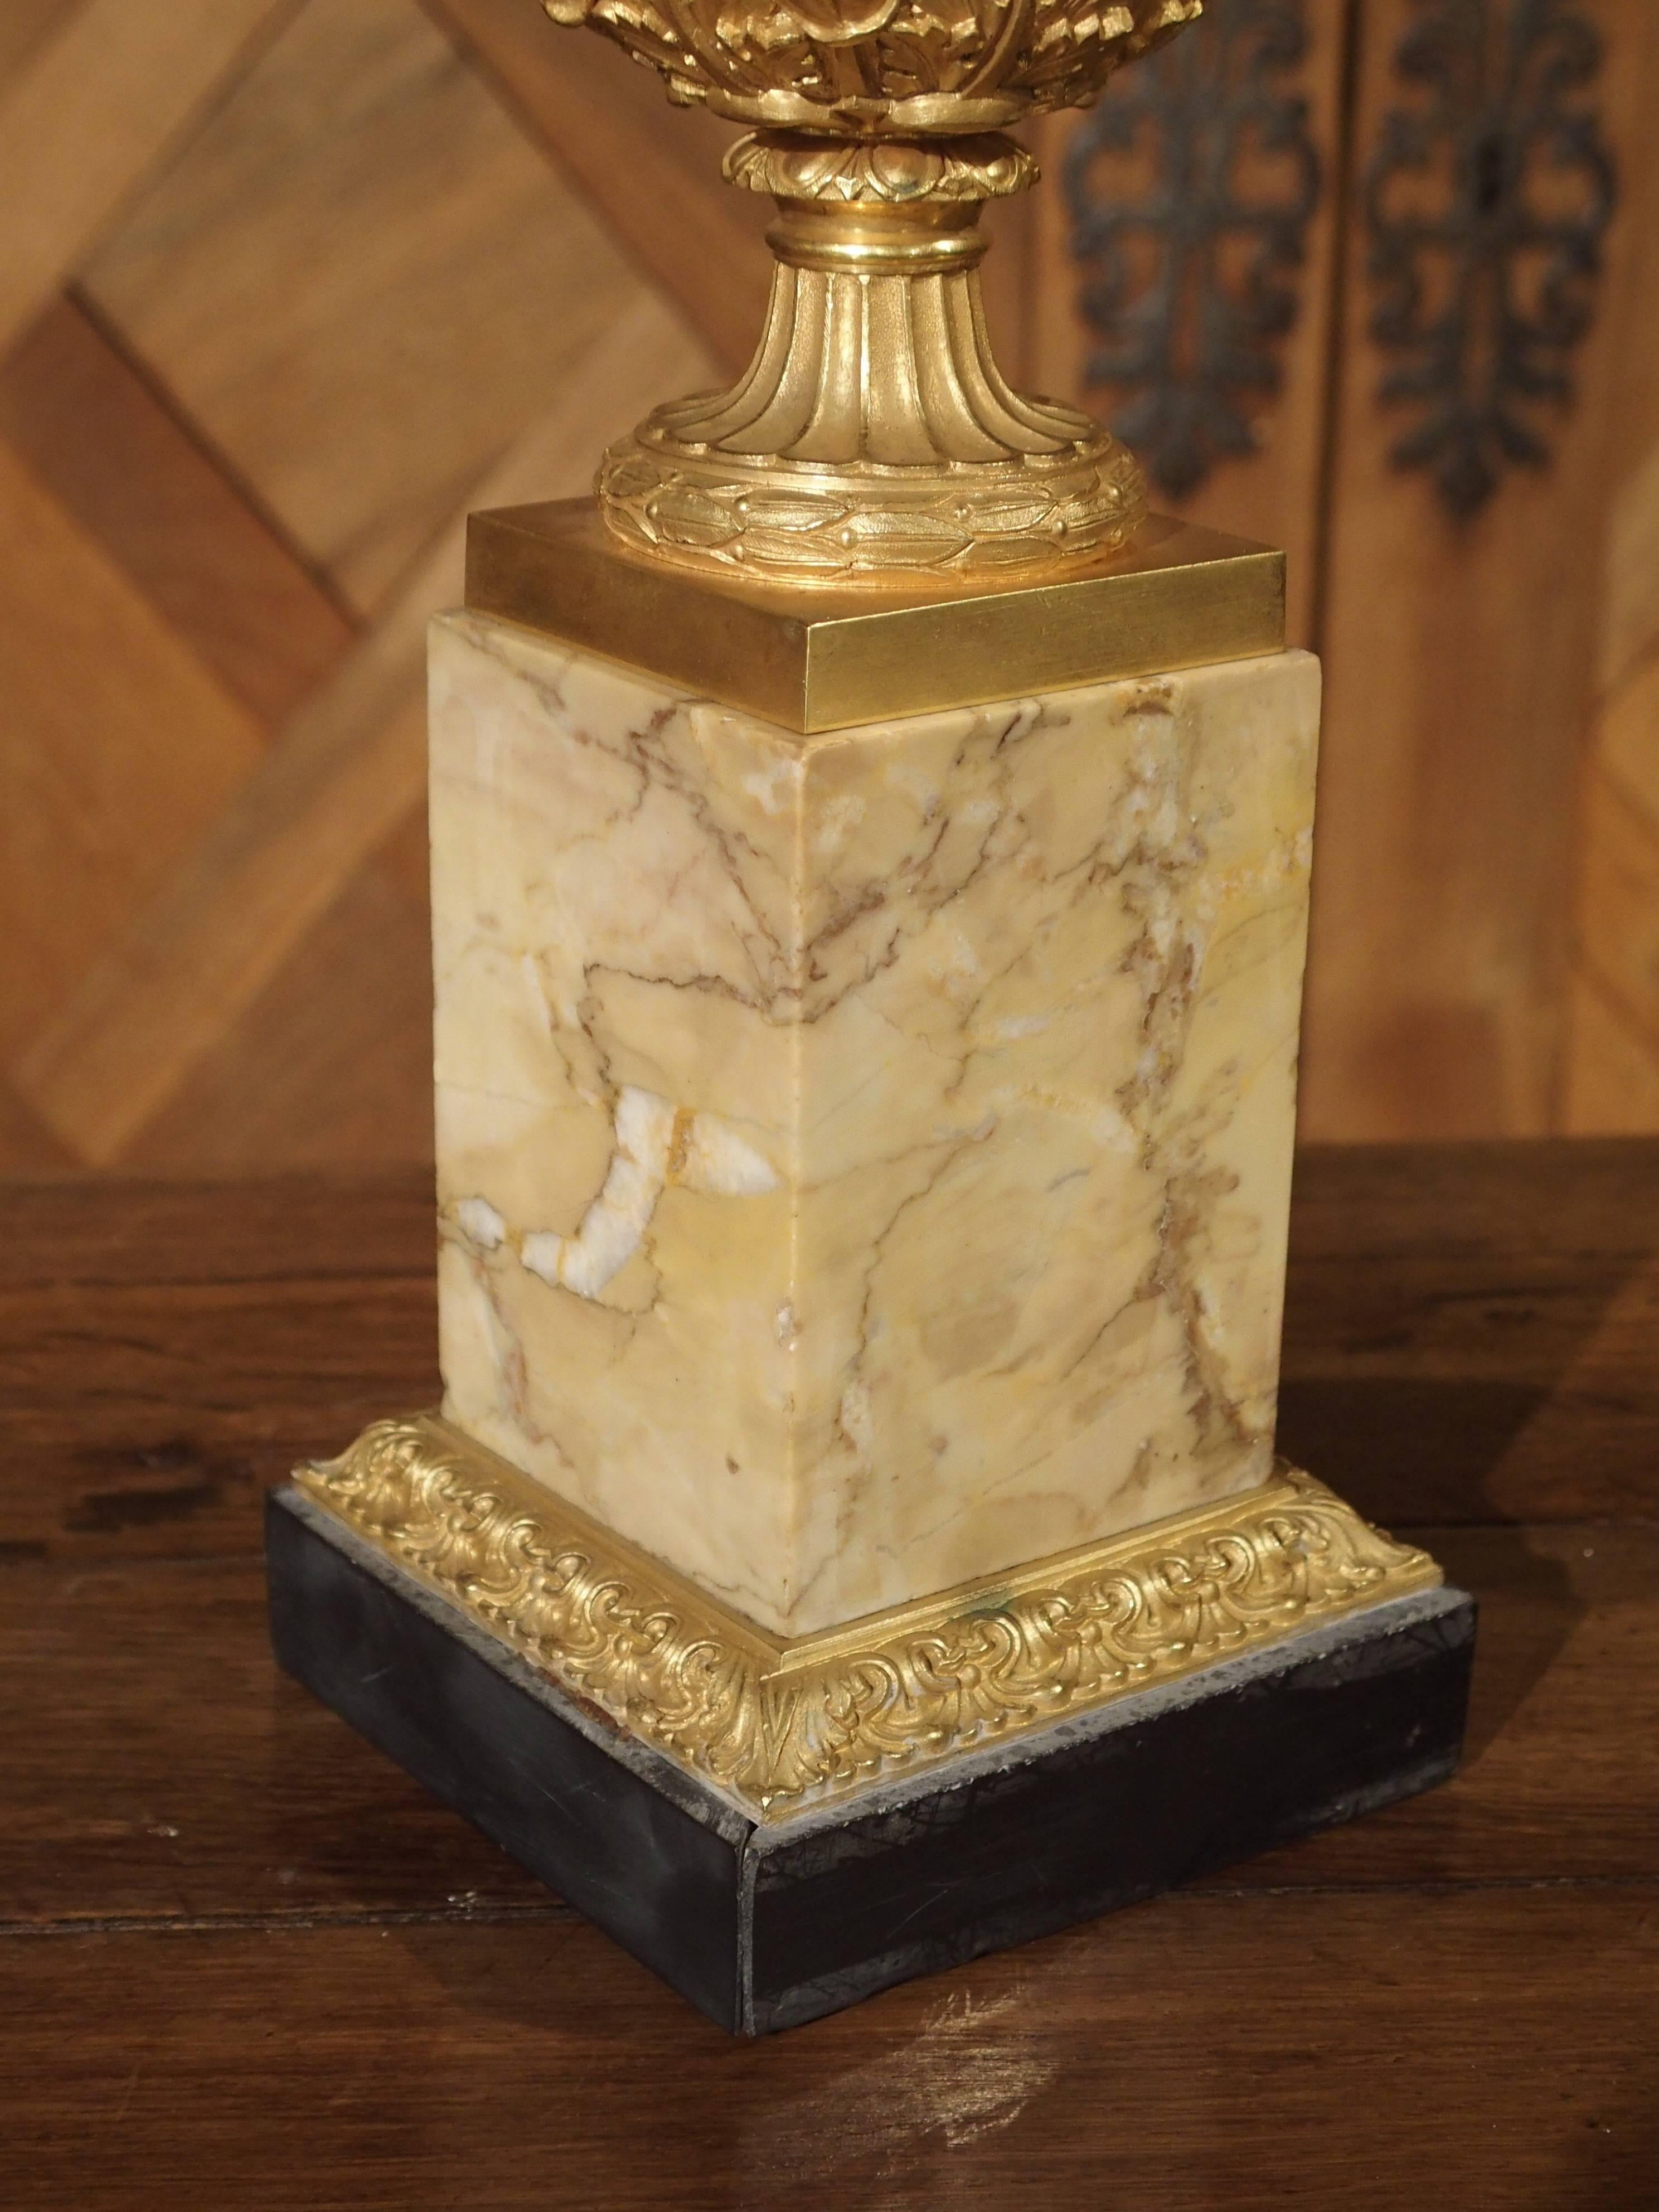 This small, early 1800s mercury gilded bronze Medici Vase rests upon a square pedestal made from Toscana marble and a stepped out black, square marble base. There are beautifully chased motifs on the vase of egg and dart, beading, stylized acanthus